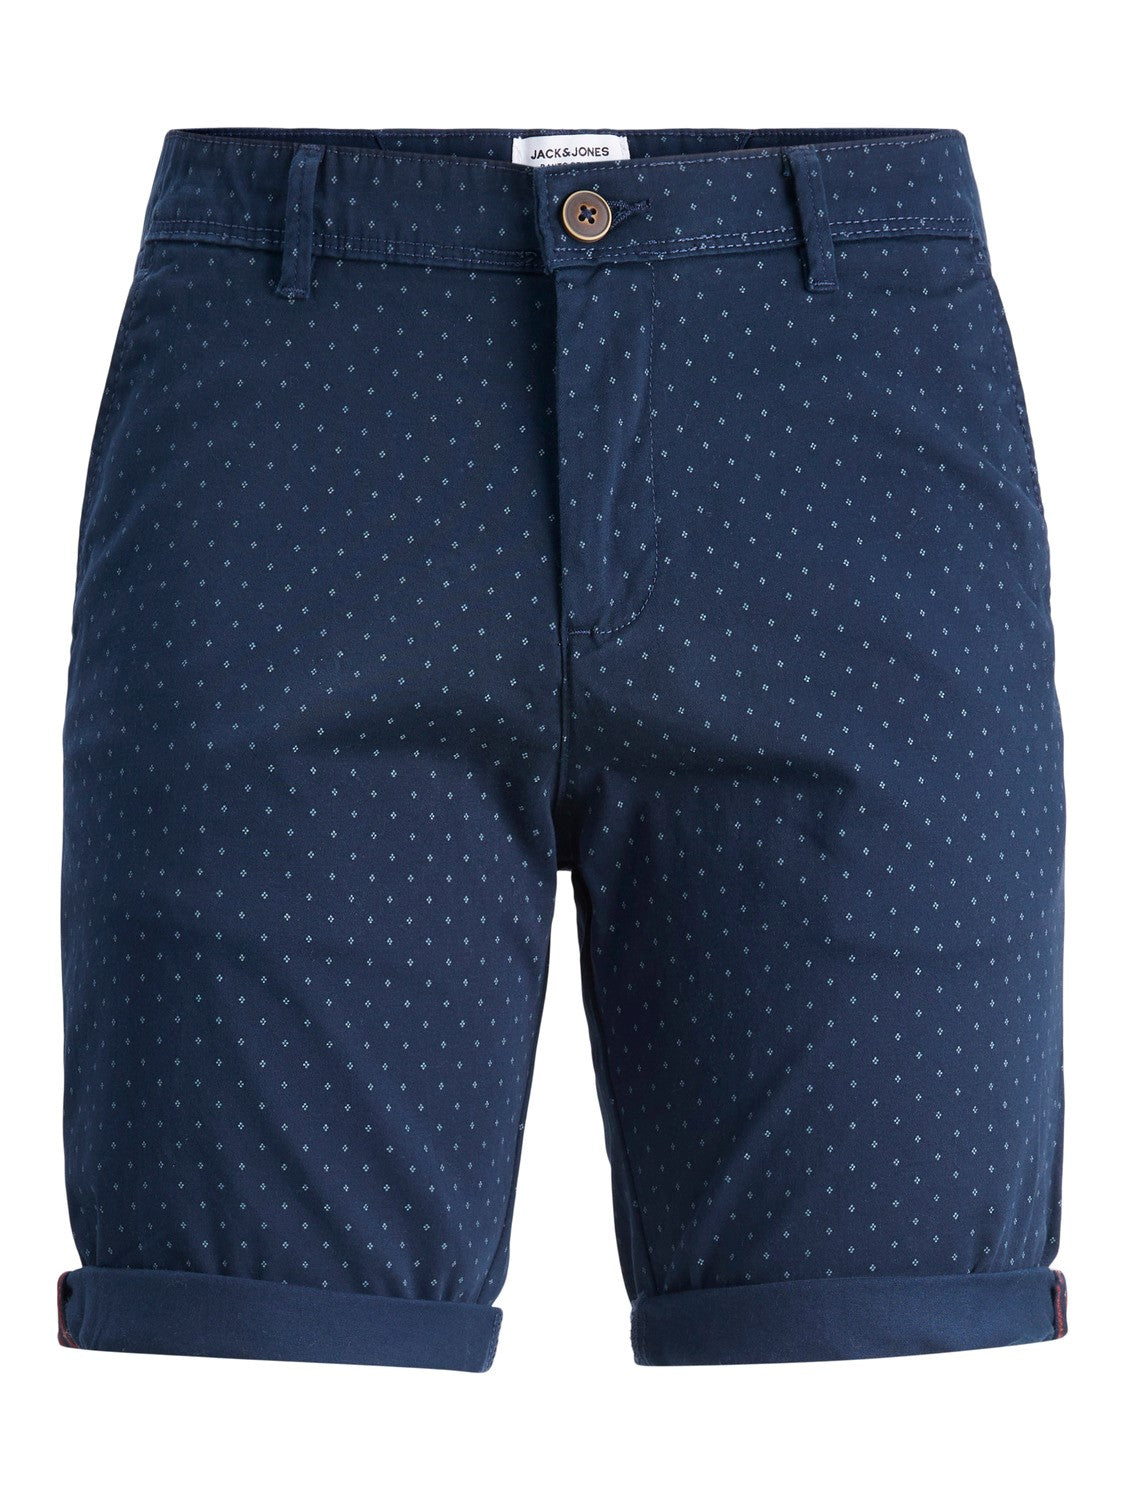 Men's Bowie Navy Printed Shorts